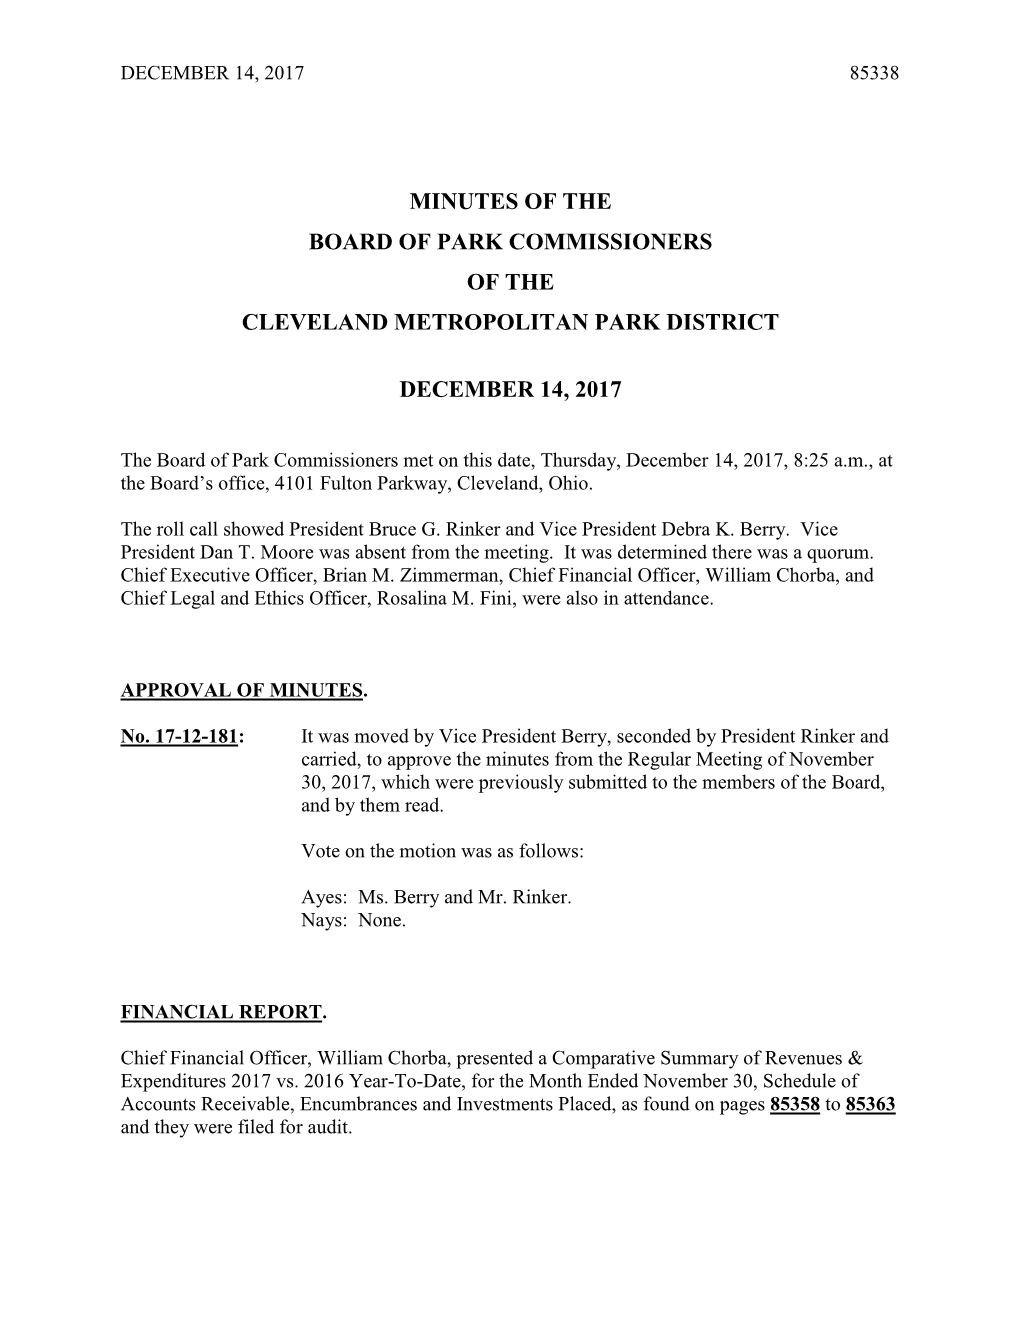 Minutes of the Board of Park Commissioners of the Cleveland Metropolitan Park District December 14, 2017